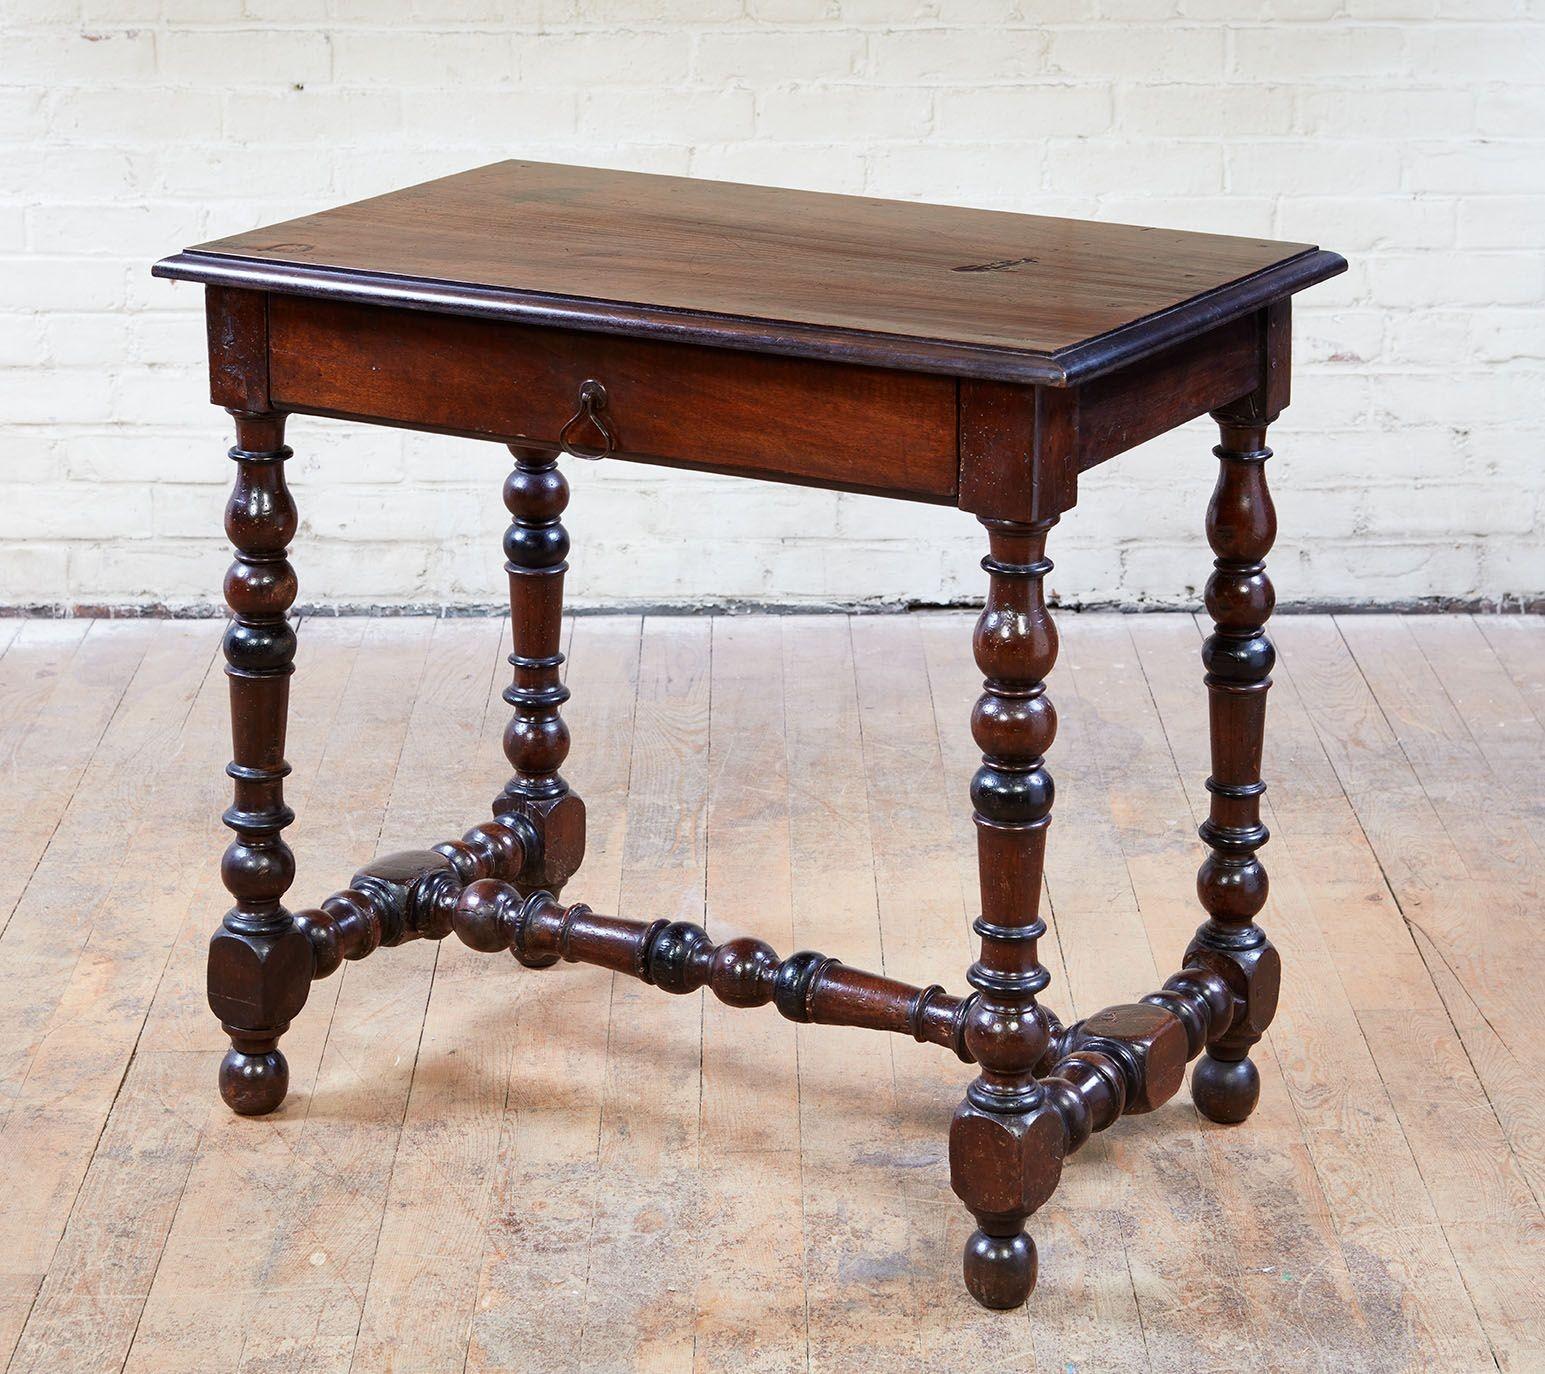 A French baroque single drawer side table in walnut having molded top above single drawer with triangular ring pull. Legs and stretcher retaining ebonized highlights and with particularly bold turnings, the whole possessing good color. Southern